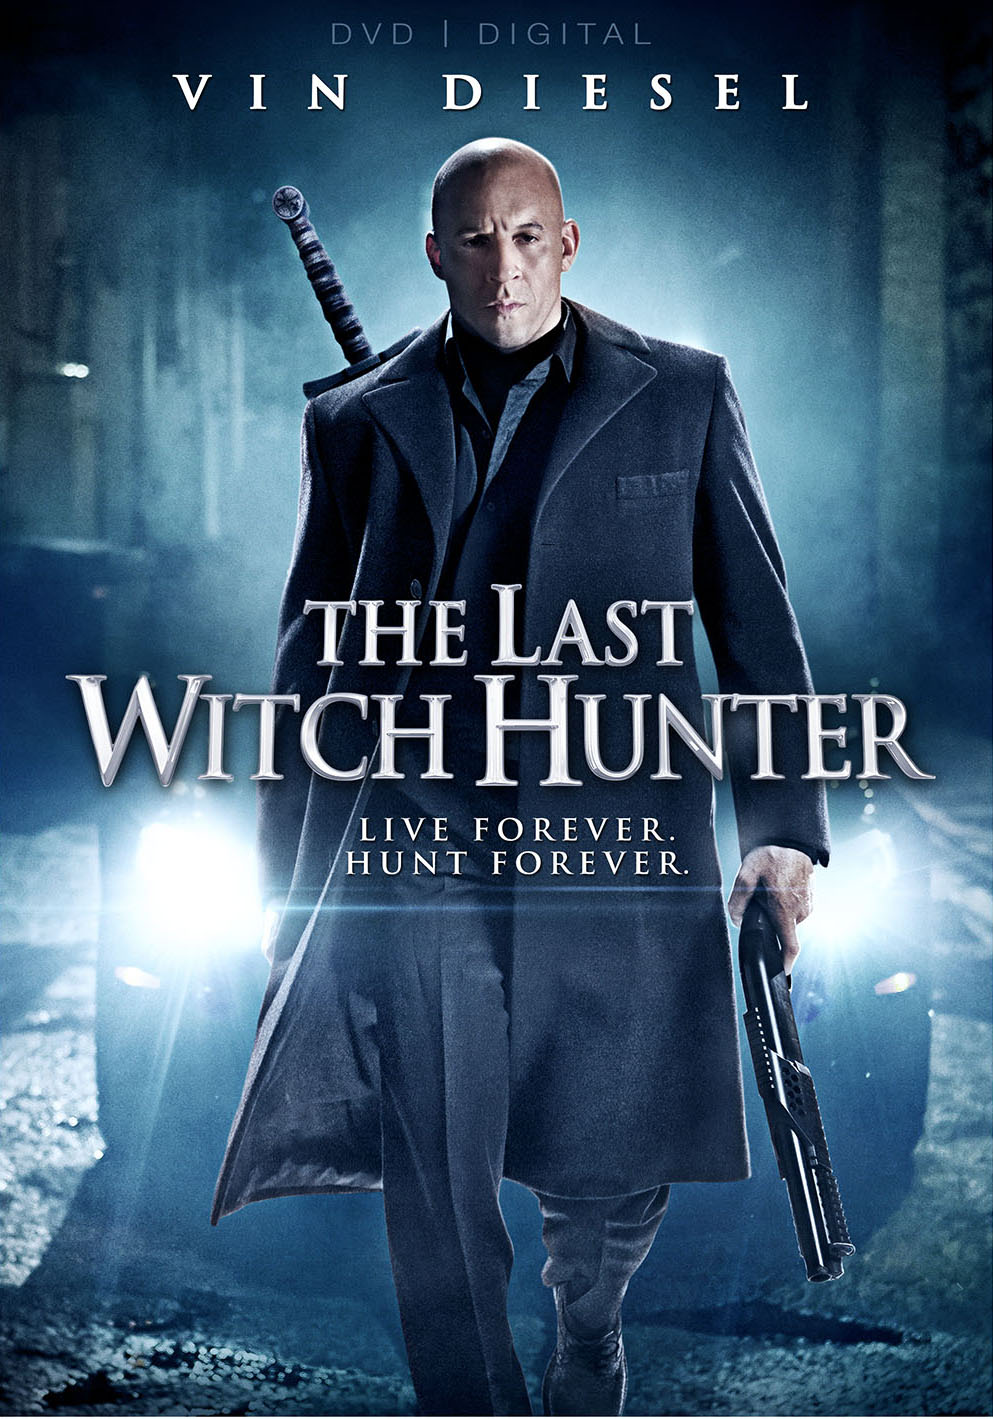 The Last Witch Hunter Dvd 15 Best Buy